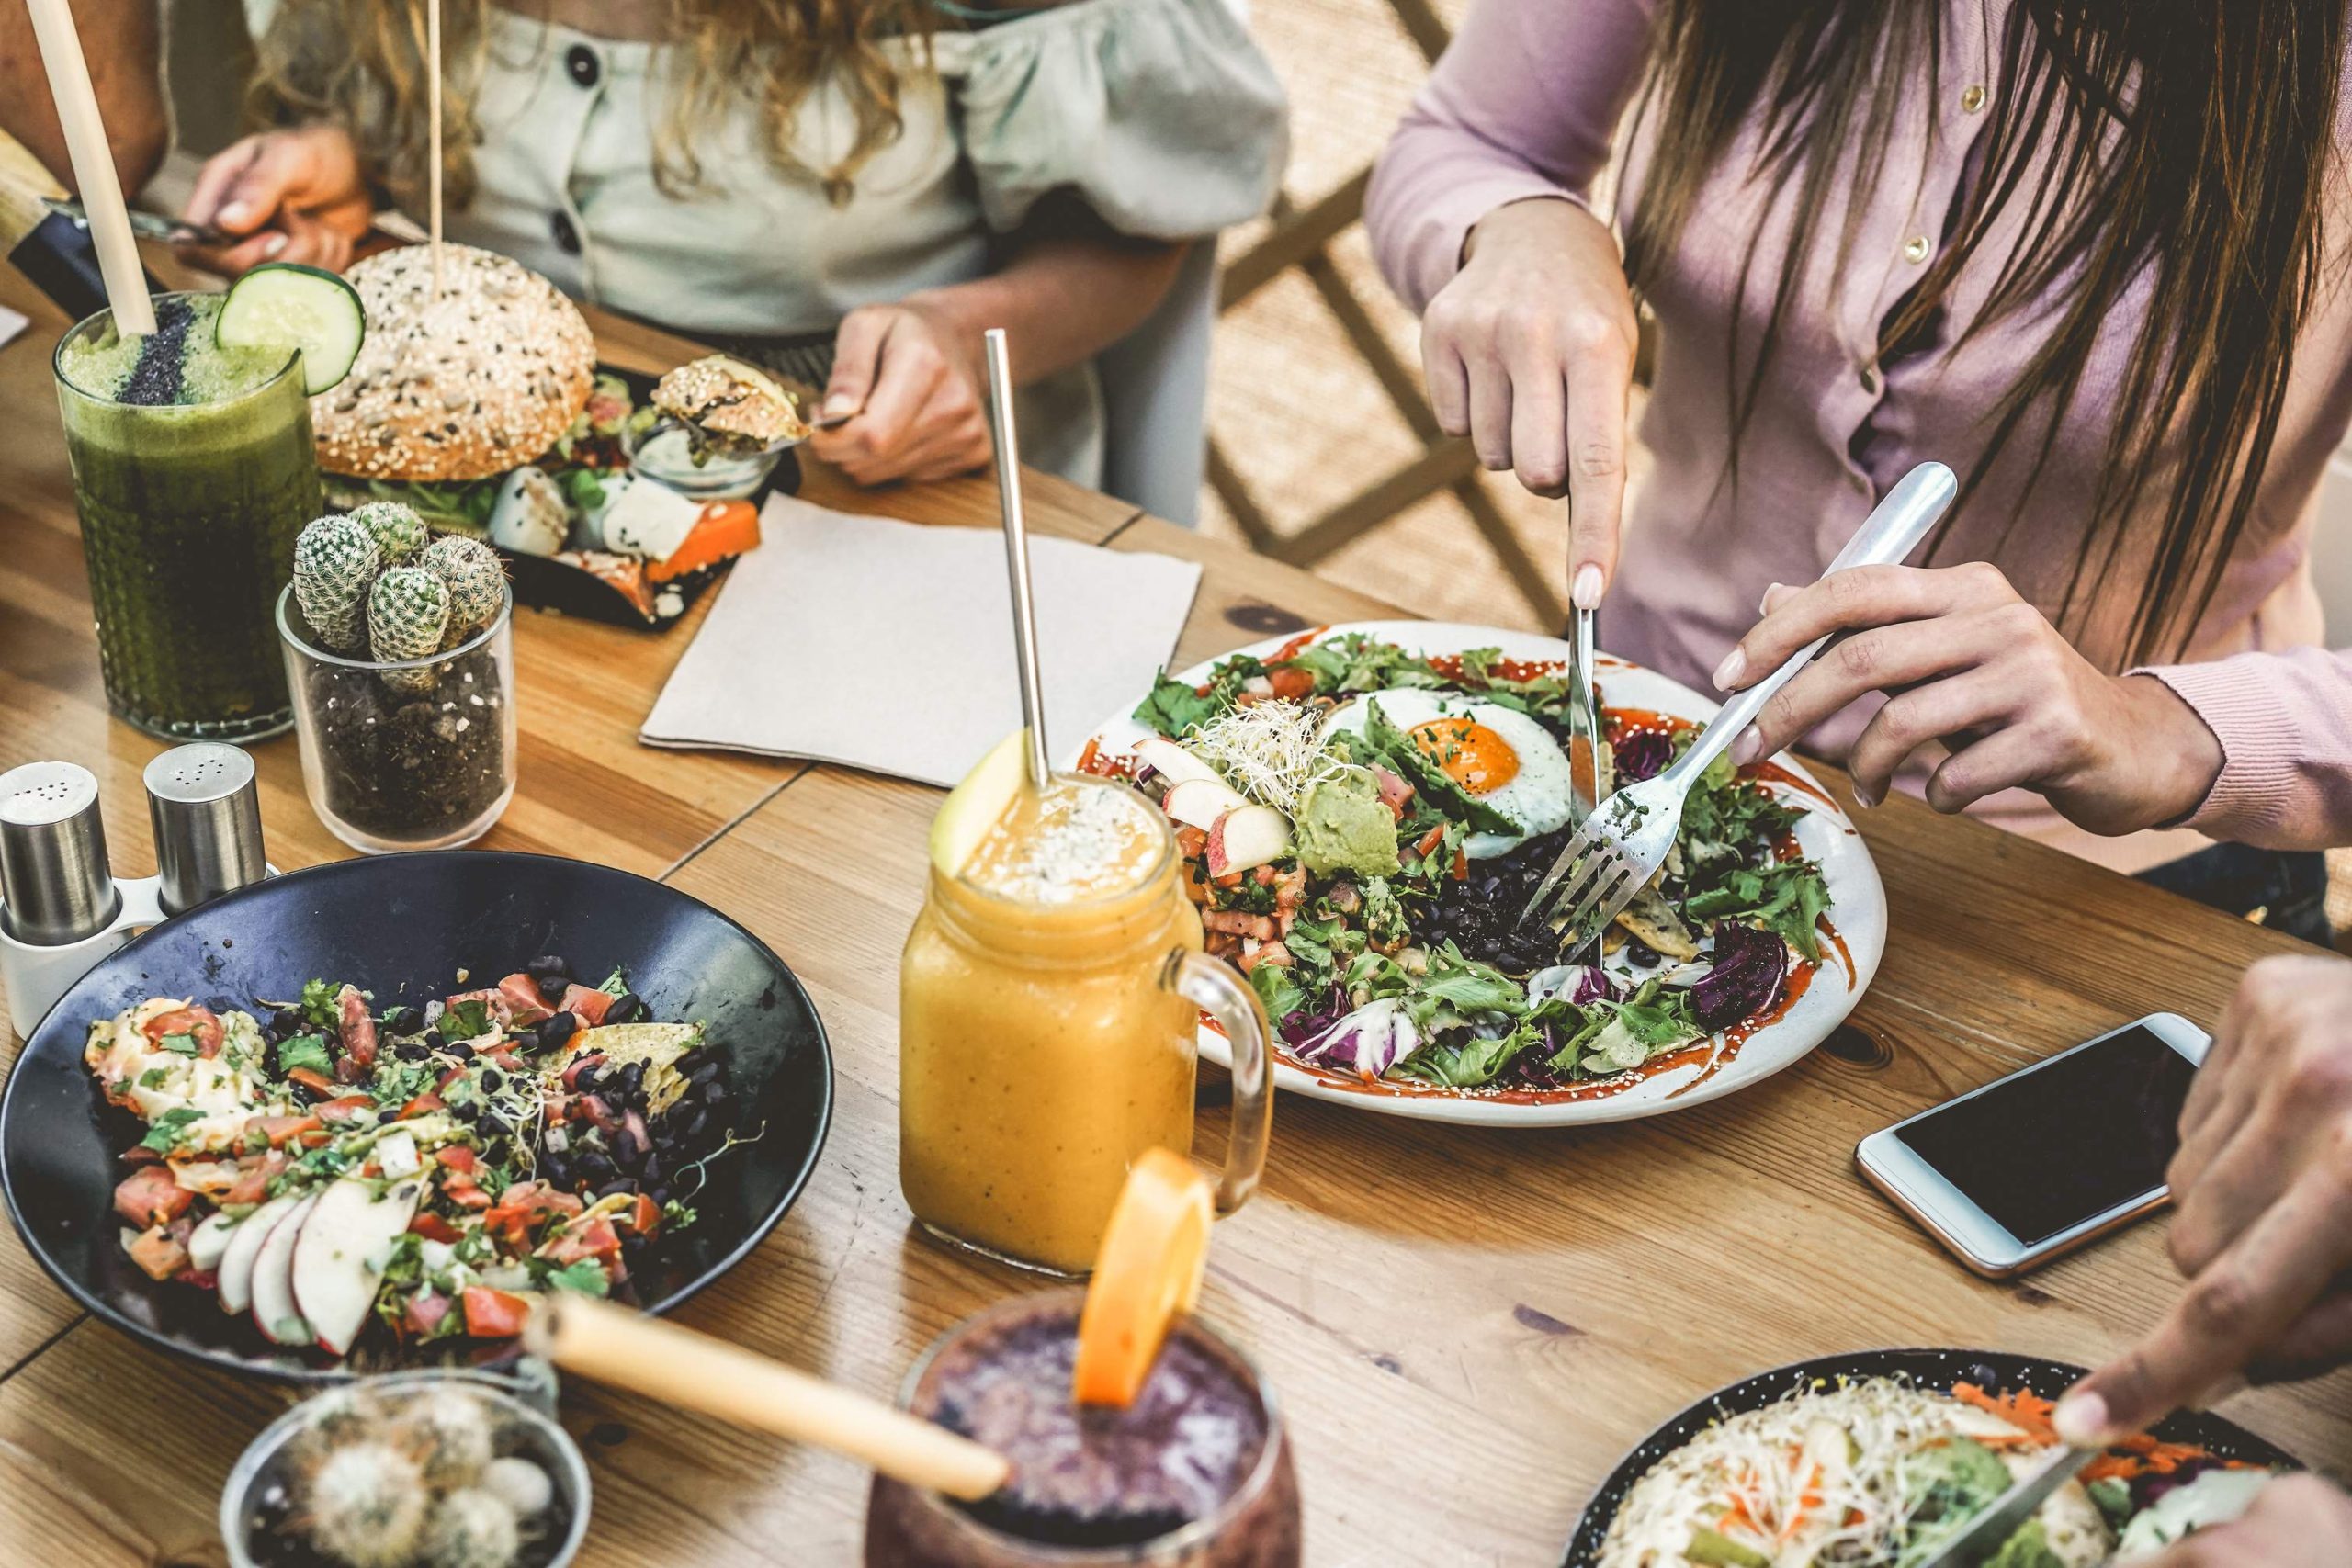 Image depicts diners out of frame eating an array of healthy foods and drinks at a restaurant.